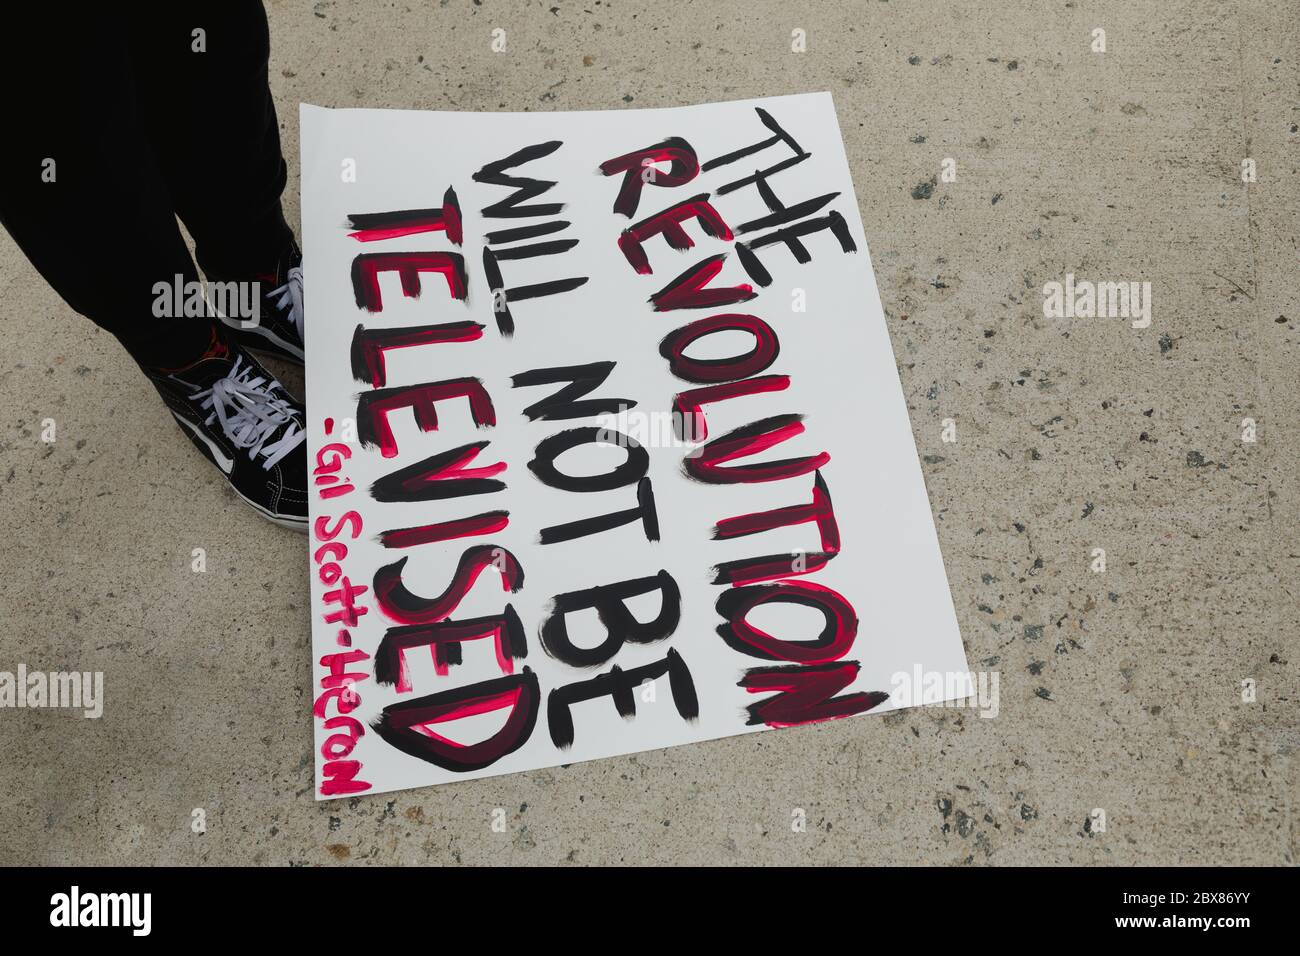 Hoboken, NJ / USA - June 5th, 2020: Black Lives Matter Peaceful Protest in Hoboken, New Jersey to advocate against anti-racism, police brutality and f Stock Photo